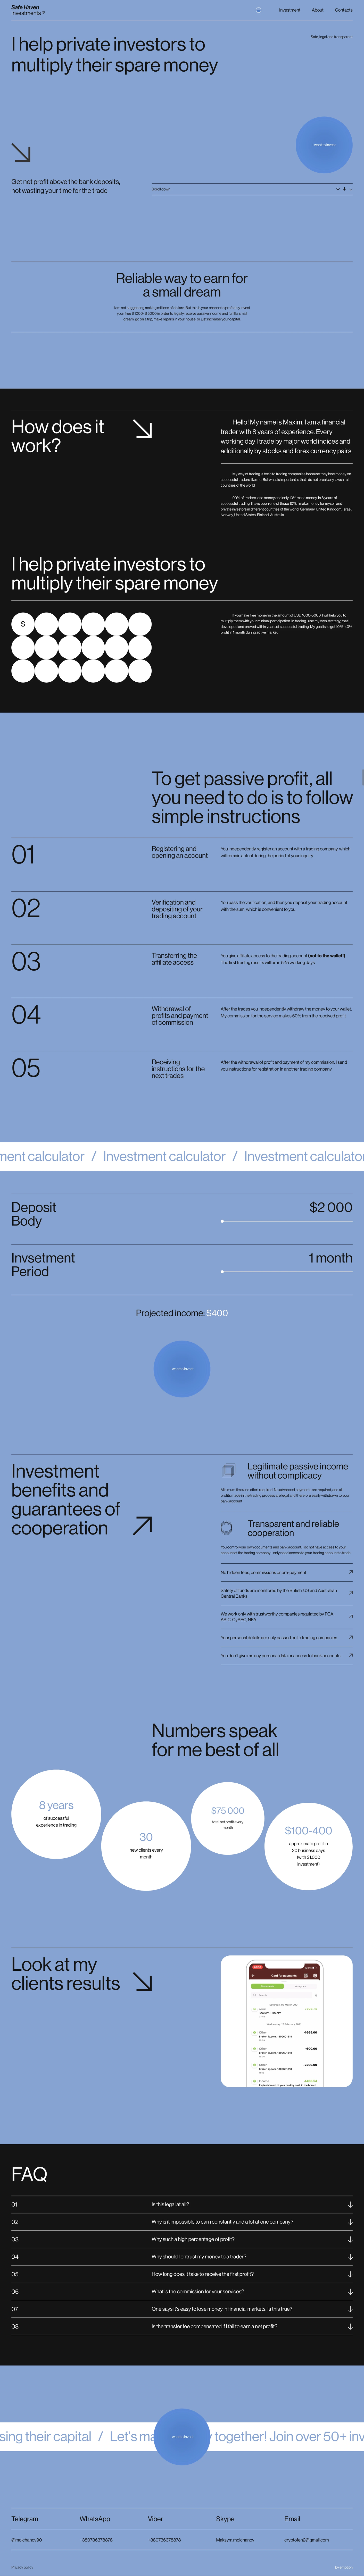 Safe Haven Investment Landing Page Example: We help private investors to multiply their spare money. Get net profit above the bank deposits, not wasting your time for the trade. Reliable way to earn for a small dream. Use an investment calculator to calculate the investment amount